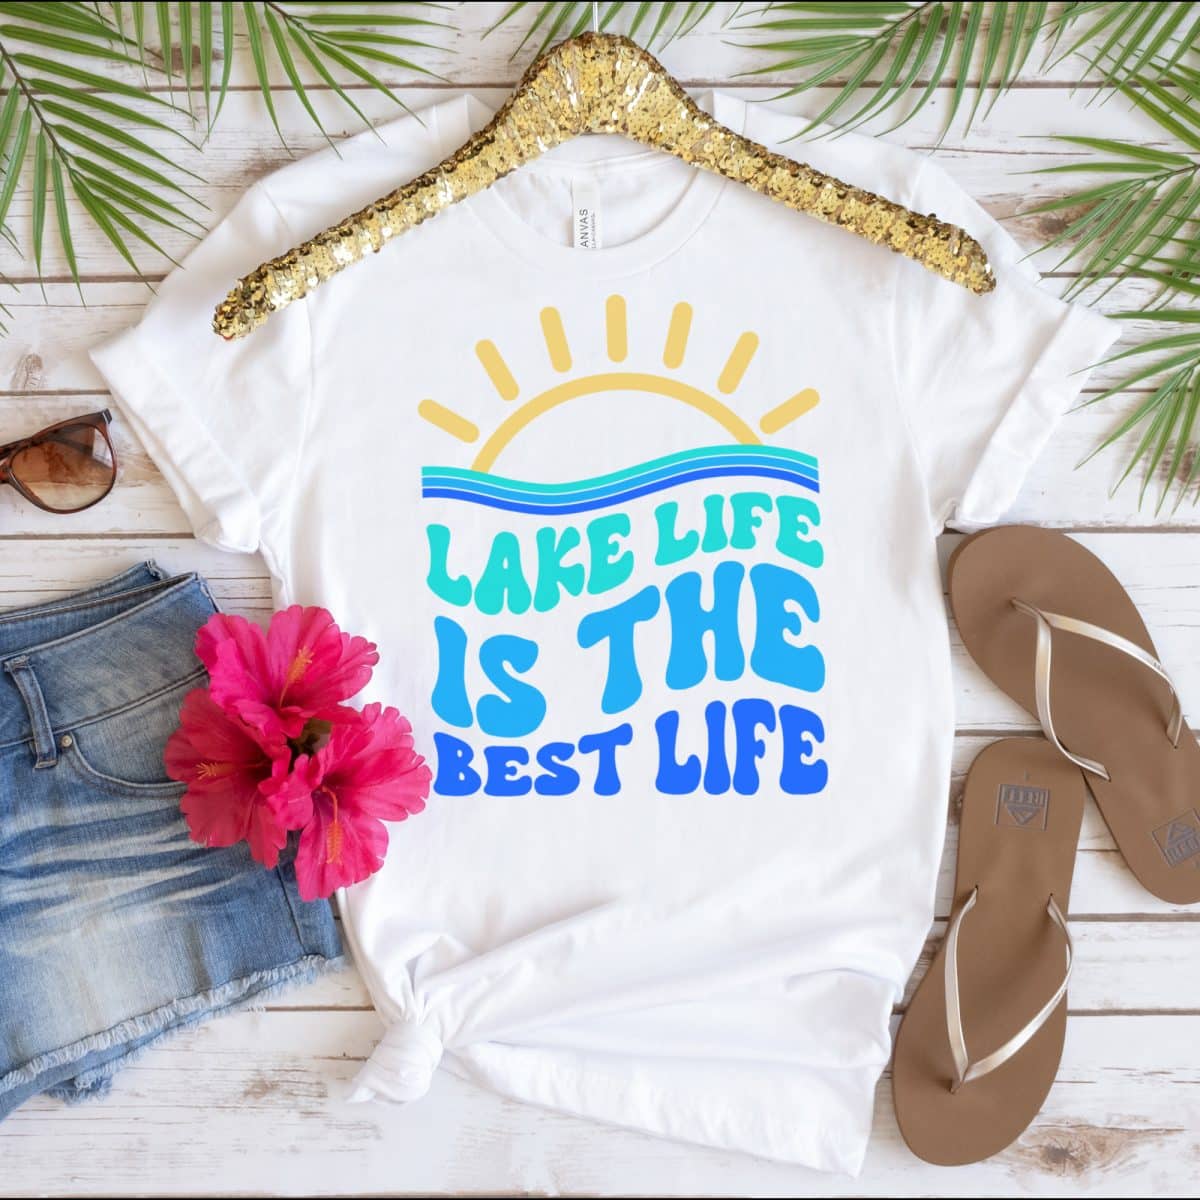 Lake life is the best life shirt by Hello Creative Family